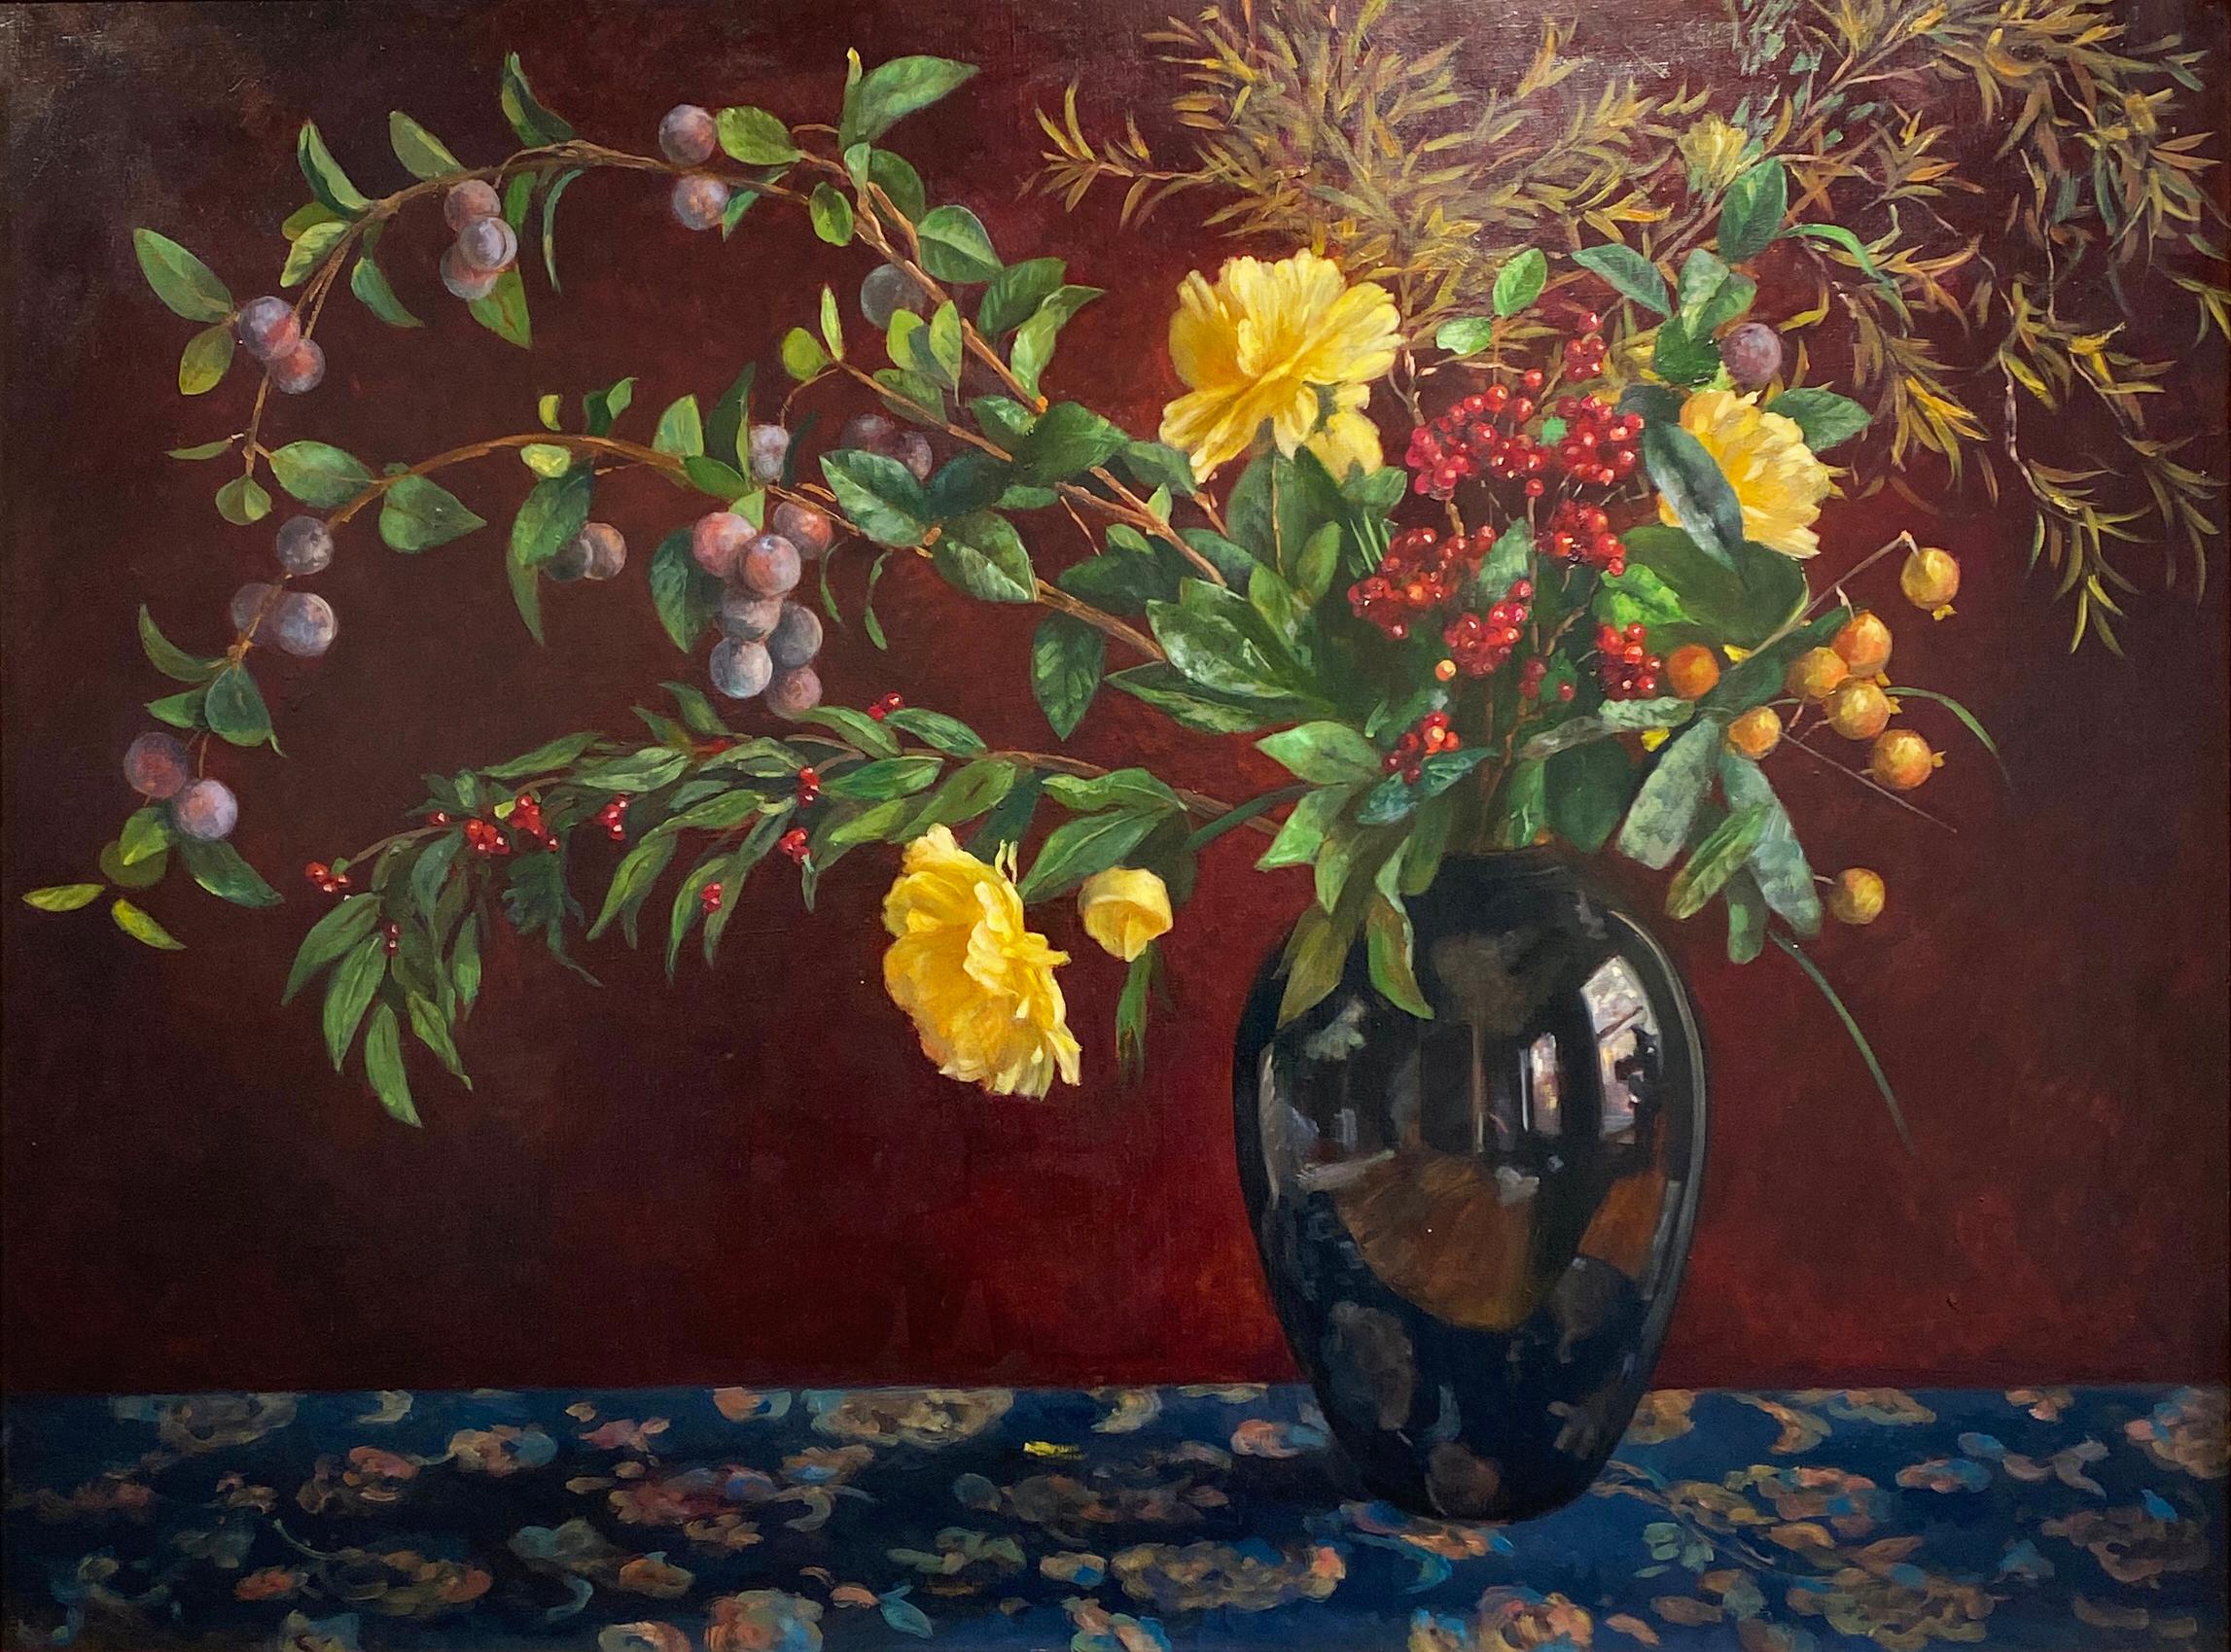 'Arrangement with a black vase' 2001 by American artist Lucy Reitzfeld. Oil on linen, 36 x 48 in. / Frame: 43 x 55 in. This beautiful still life painting features a vase with a lush, botanical arrangement of berries, grapes, yellow chrysanthemums,